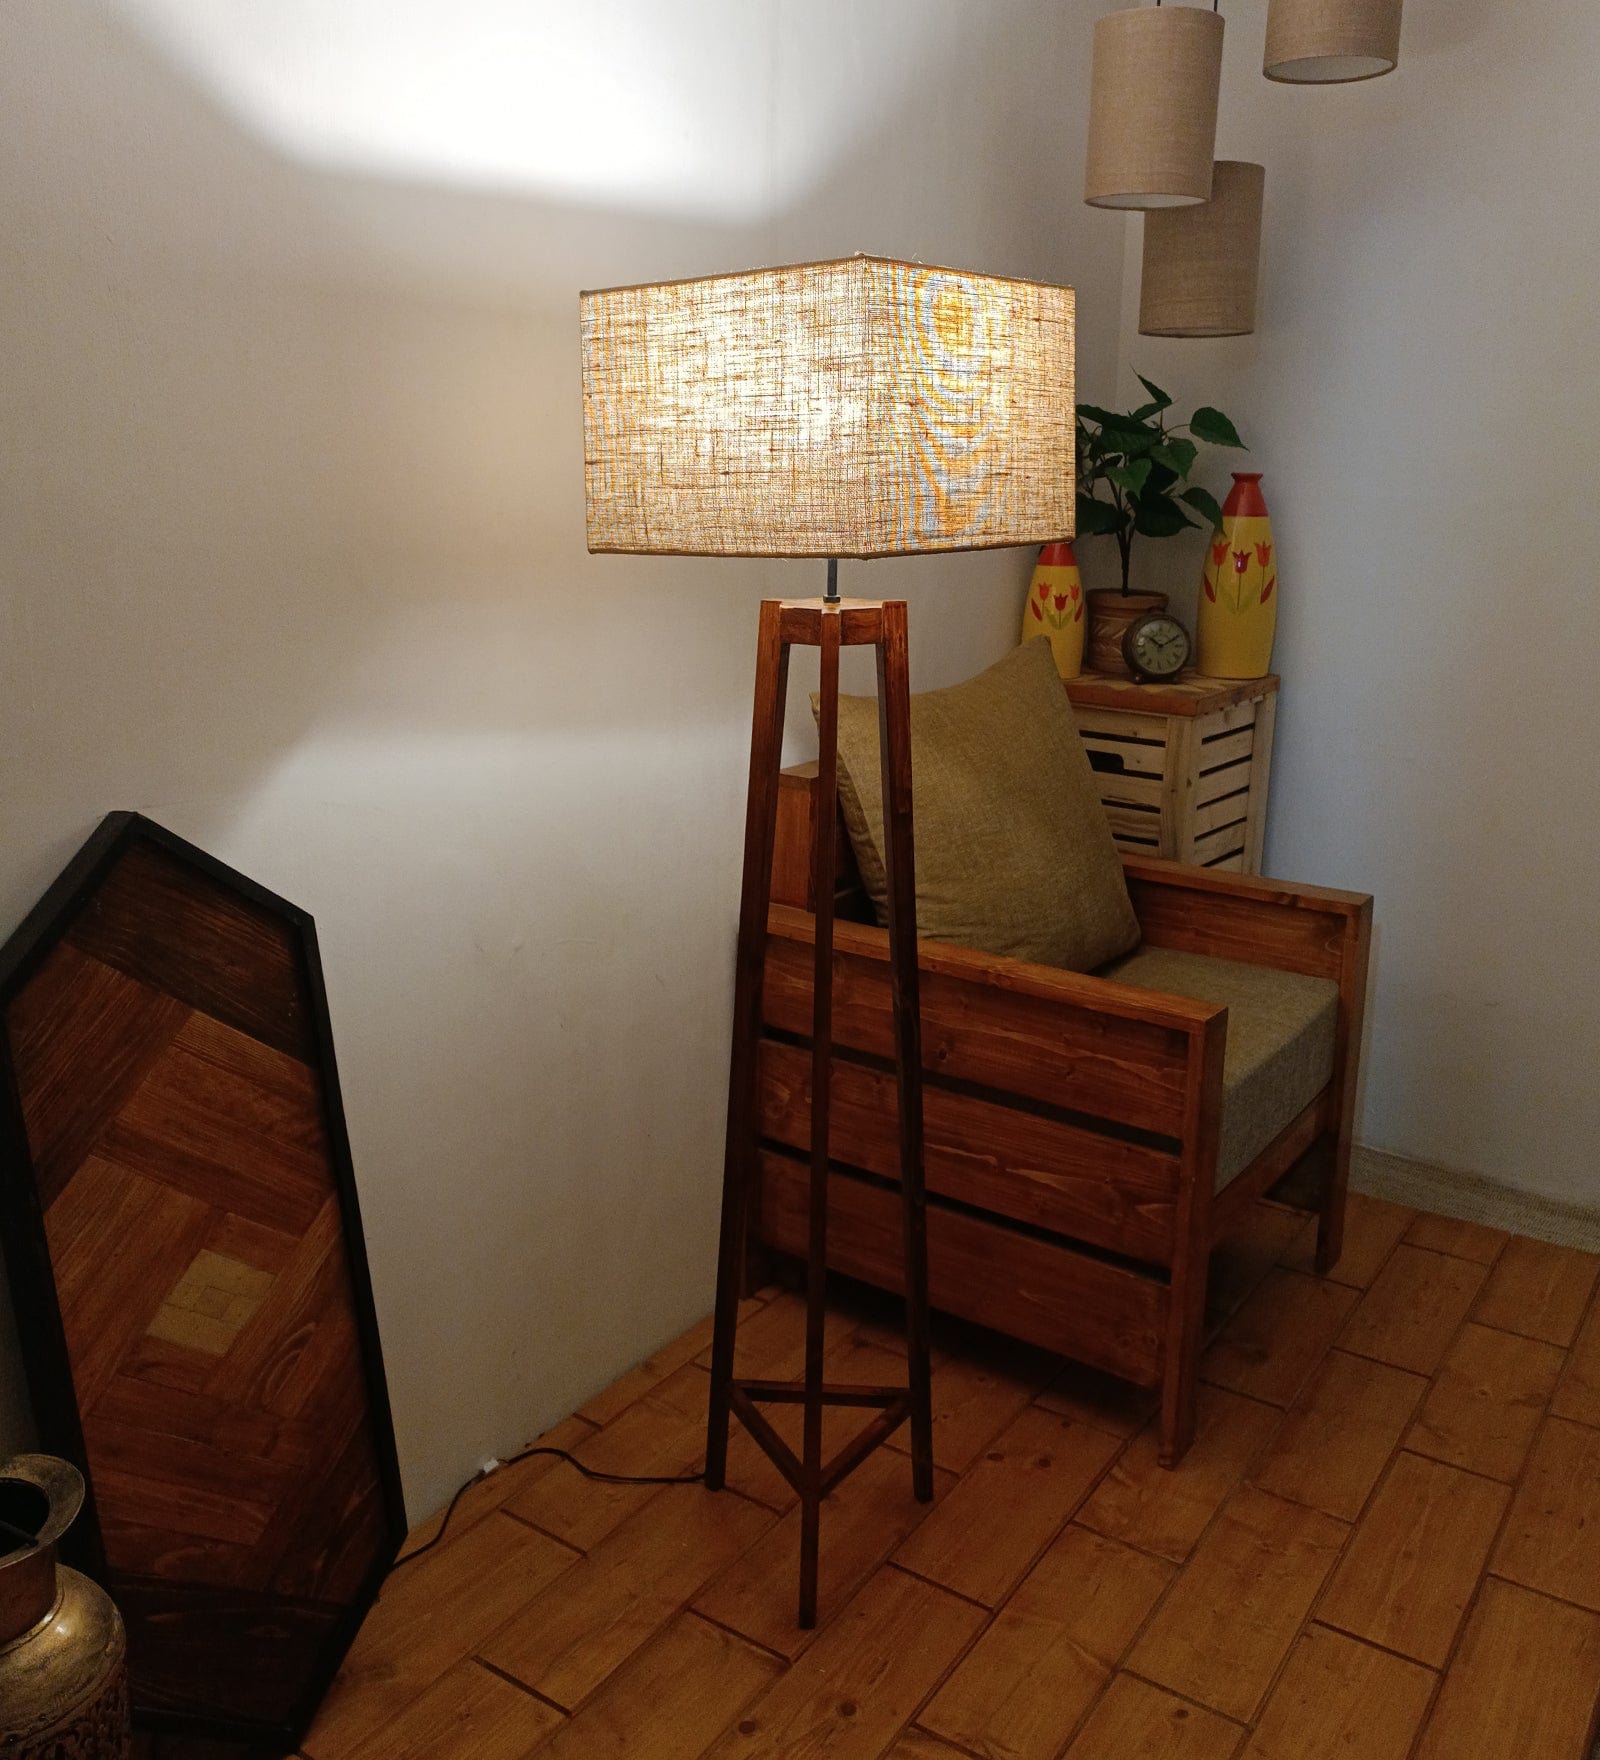 Adrienne Wooden Floor Lamp with Brown Base and Premium Beige Fabric Lampshade (BULB NOT INCLUDED)